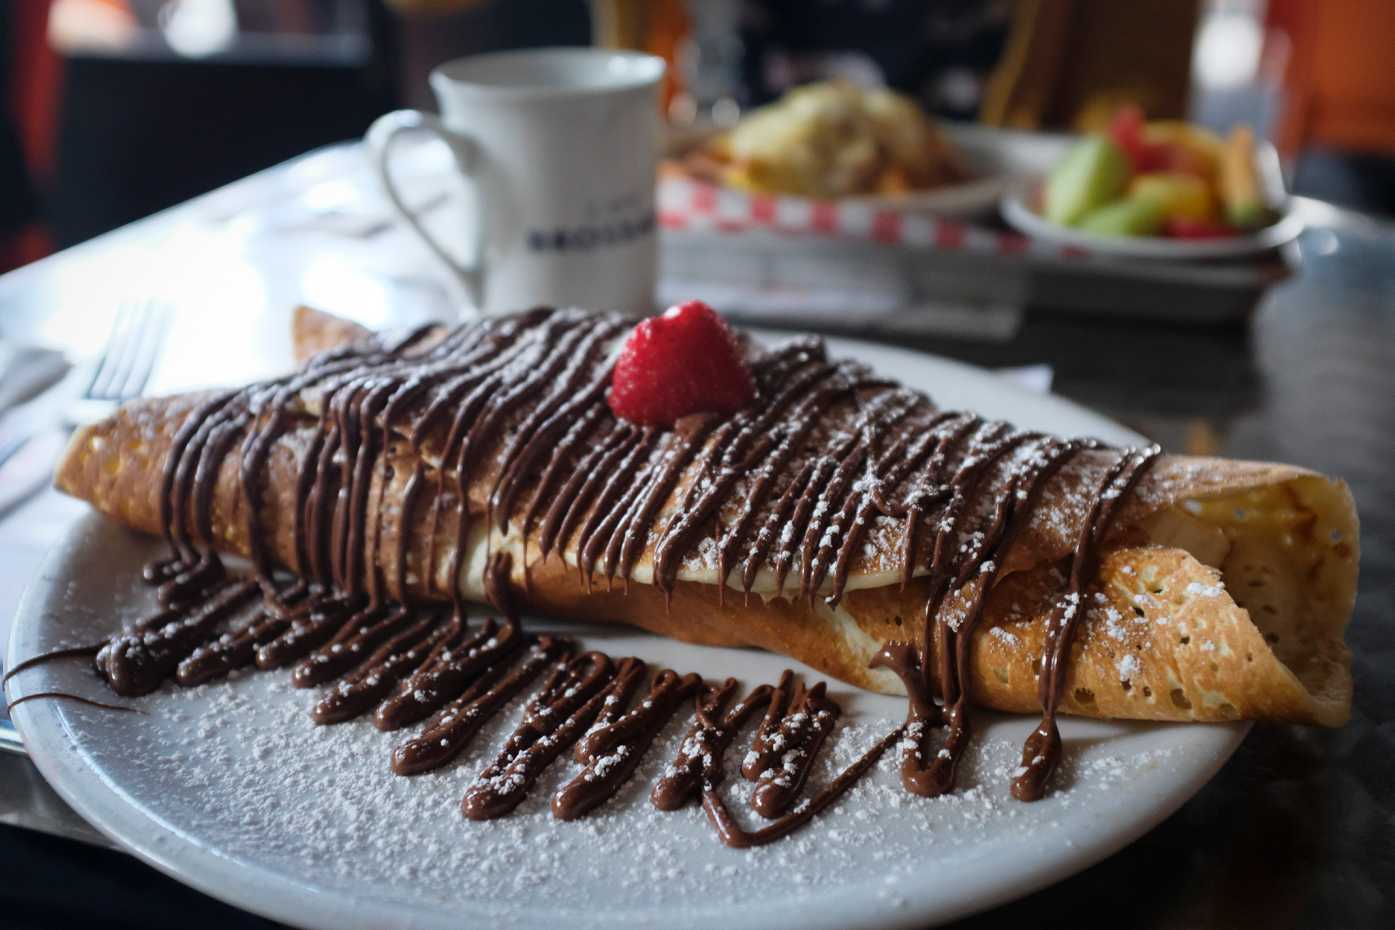 A delicious and large crepe